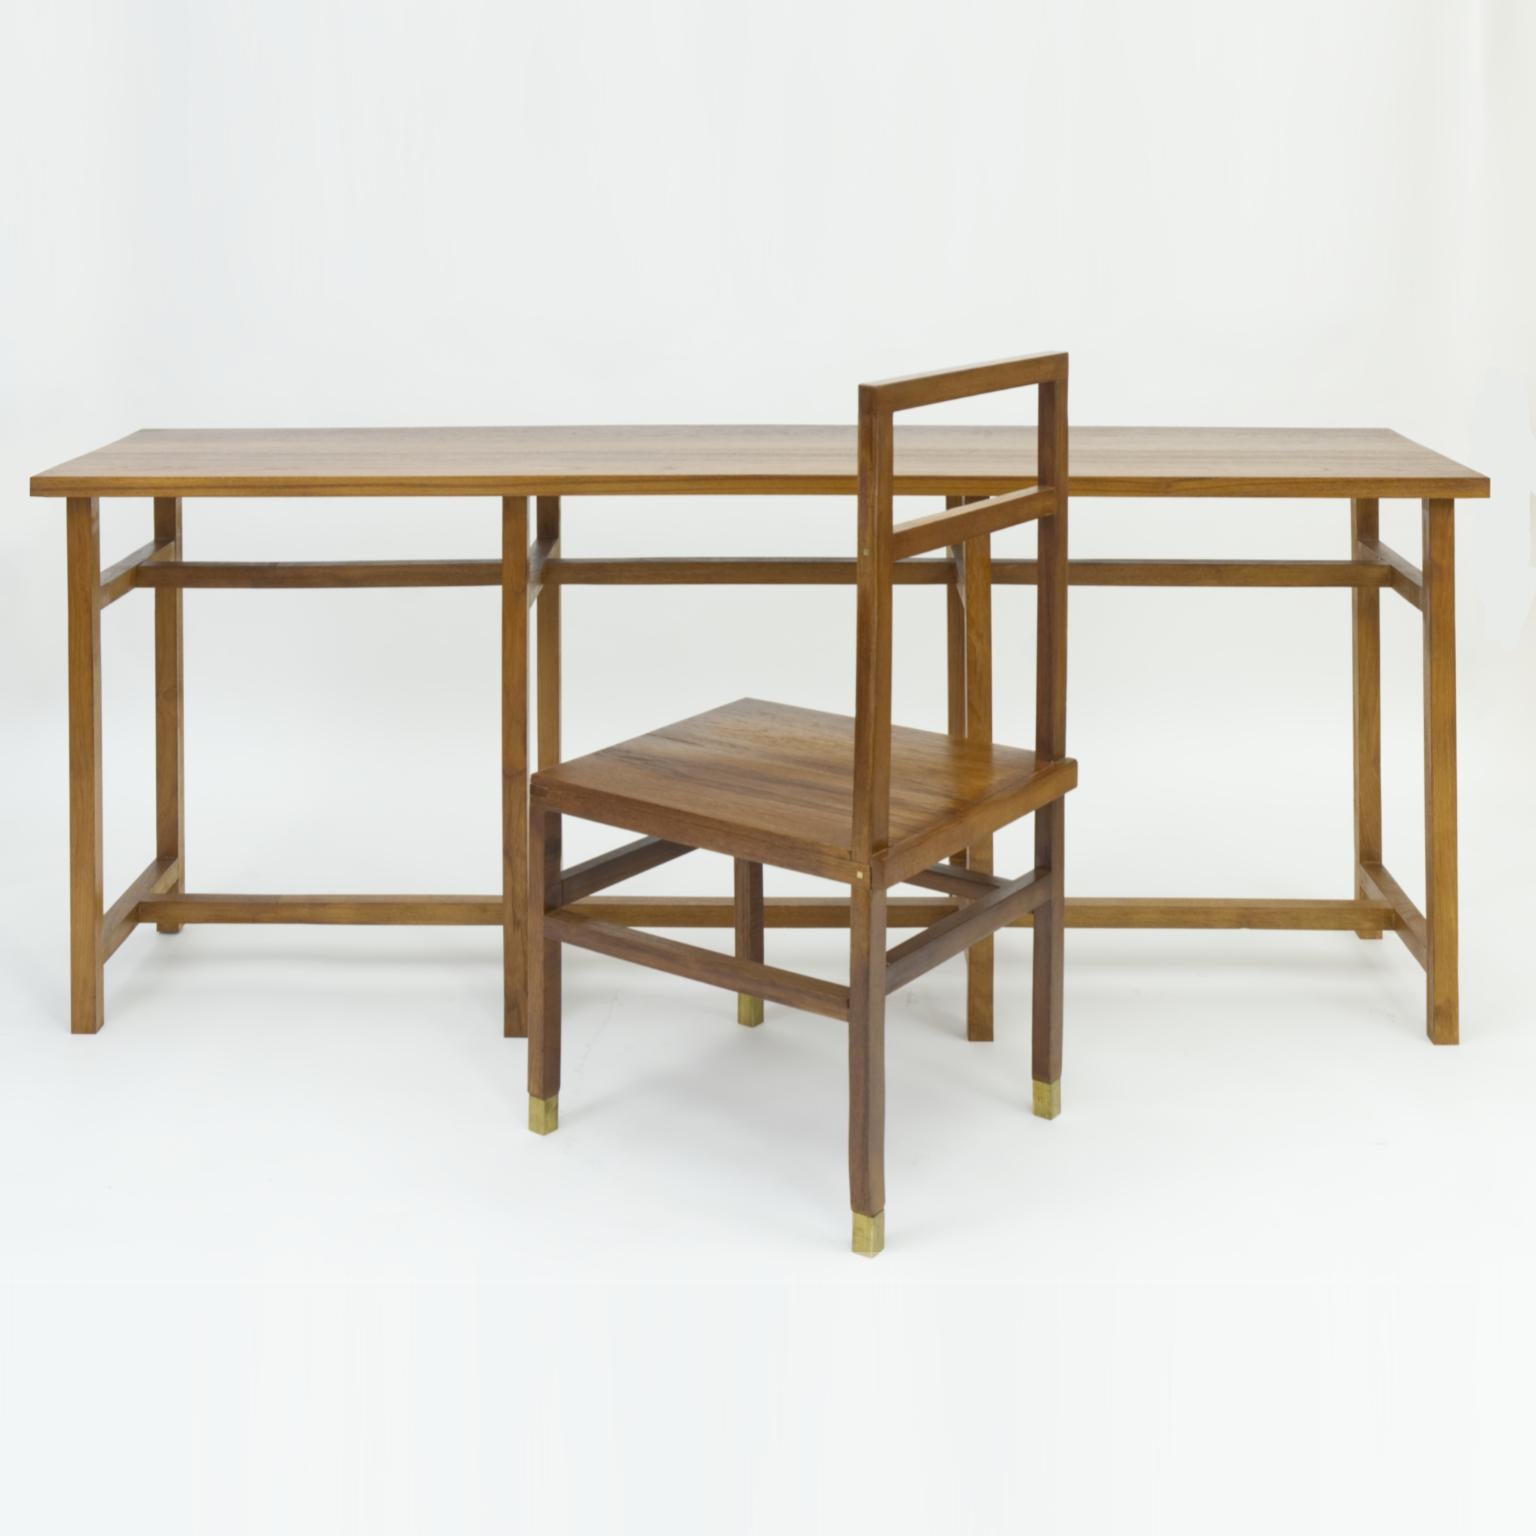 Geometric Minimal Console Hardwood Table In New Condition For Sale In Brooklyn, NY